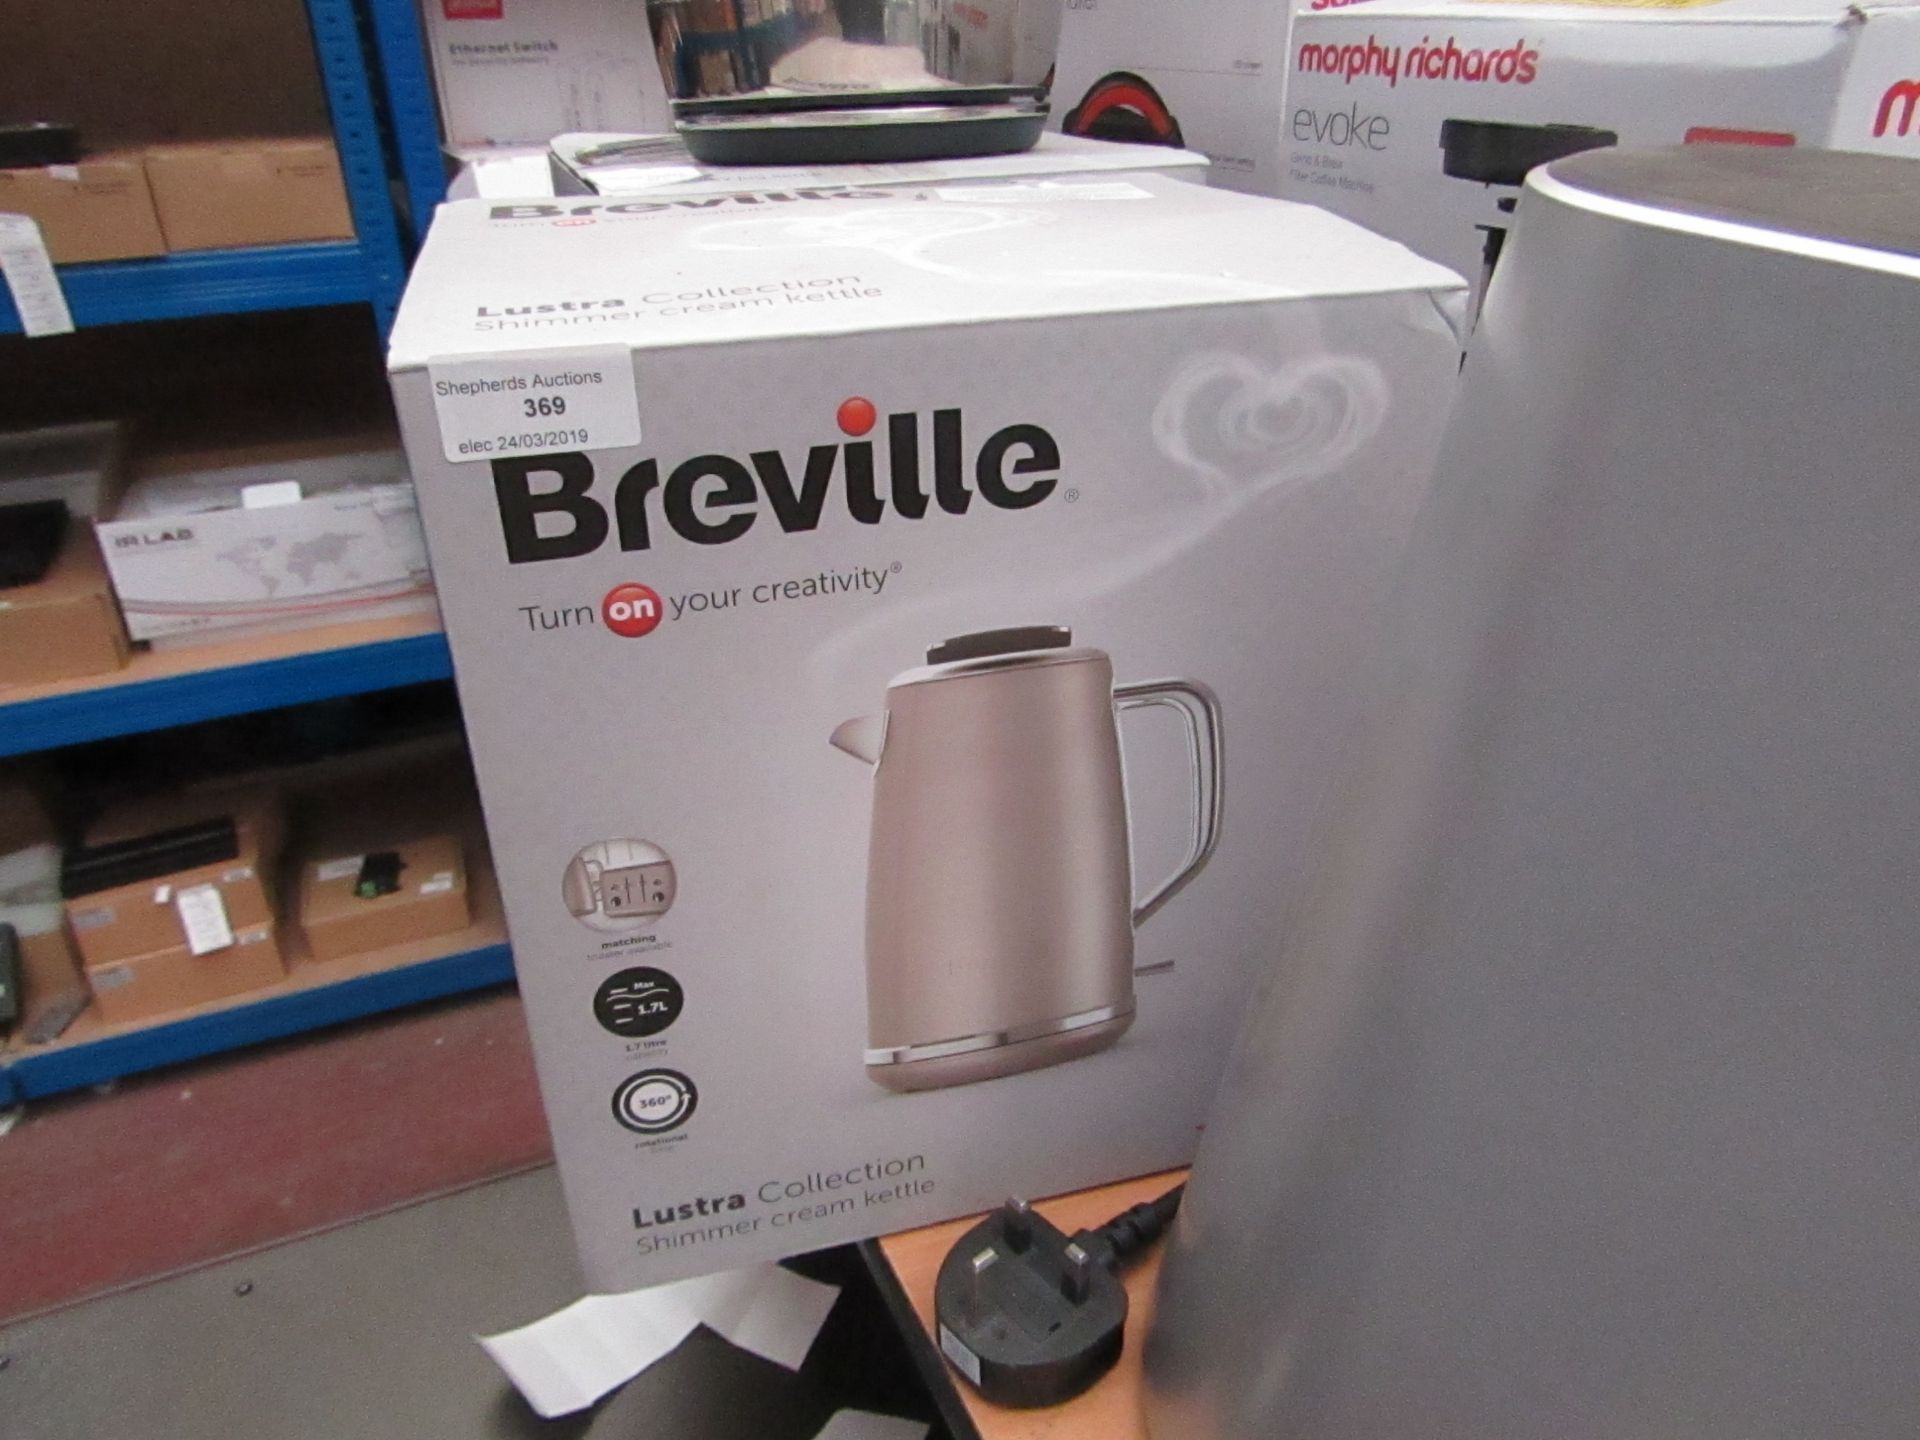 Breville Lustra Collection Shimmer Cream Kettle, boxed and tested working